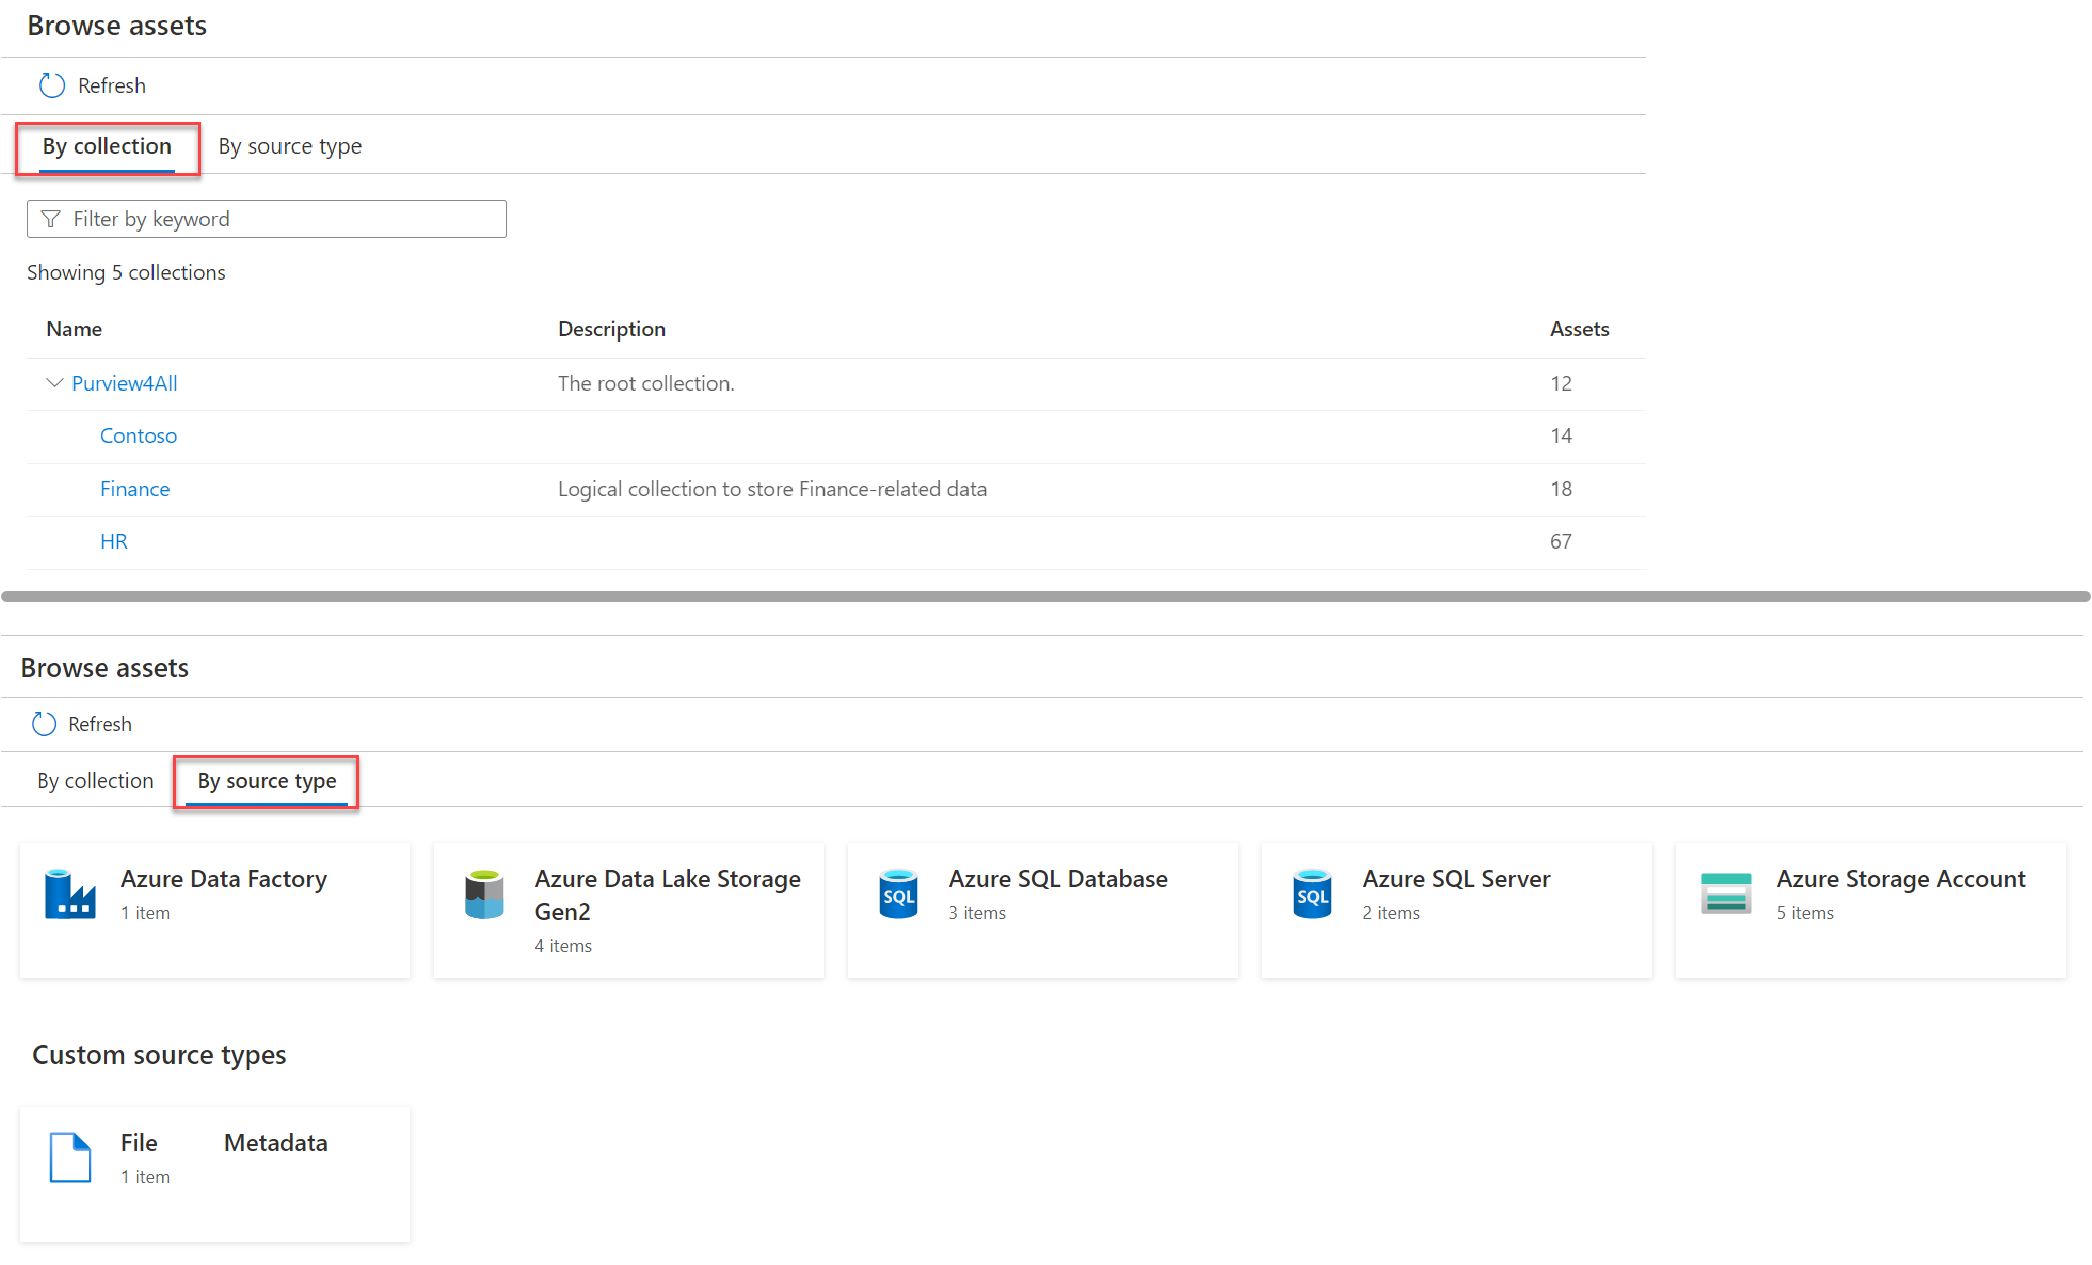 Screenshot of Microsoft Purview Governance Portal interface, displaying search by collection or source type interface options.